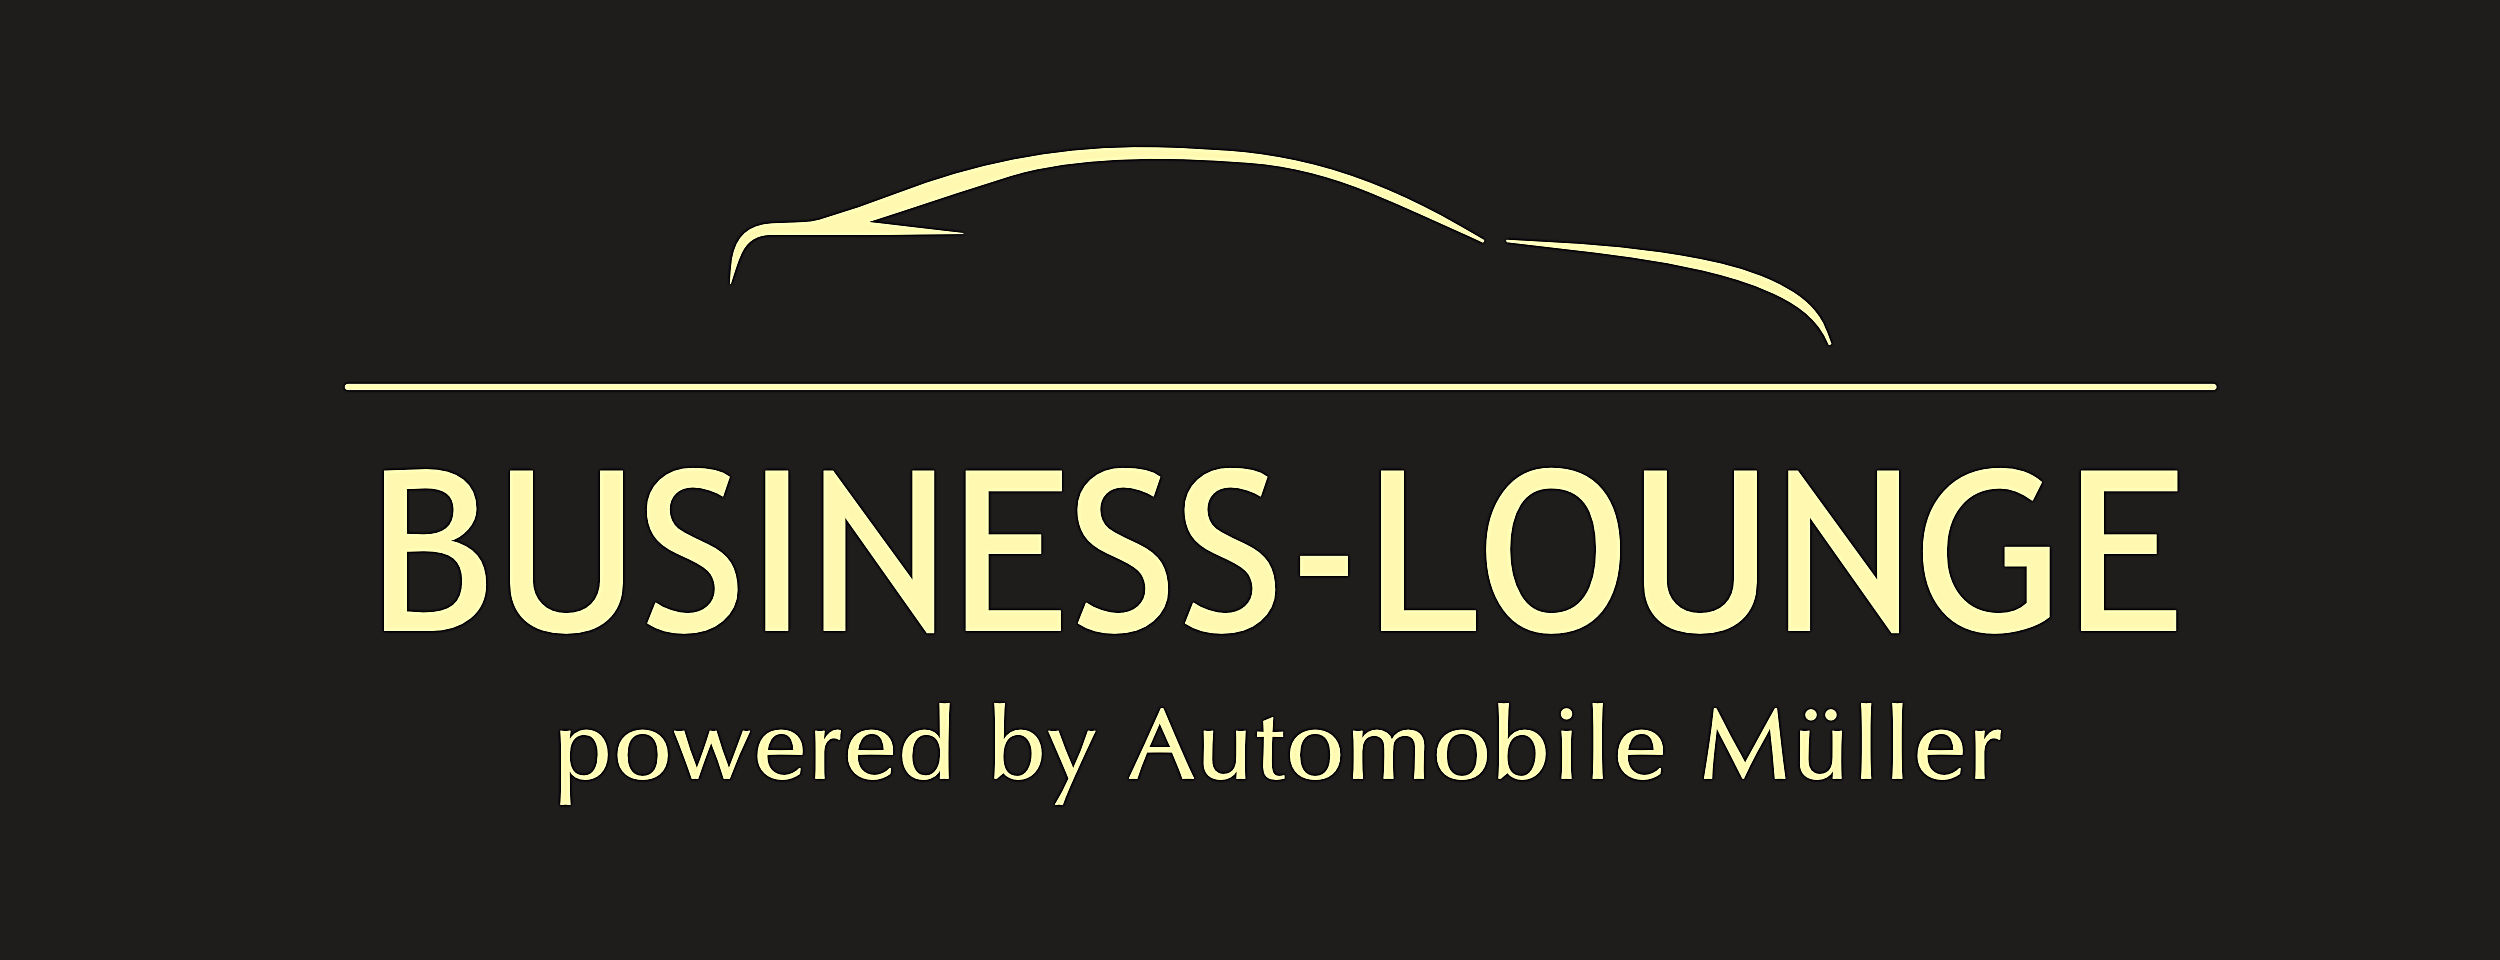 Business-Lounge powered by Automobile Müller